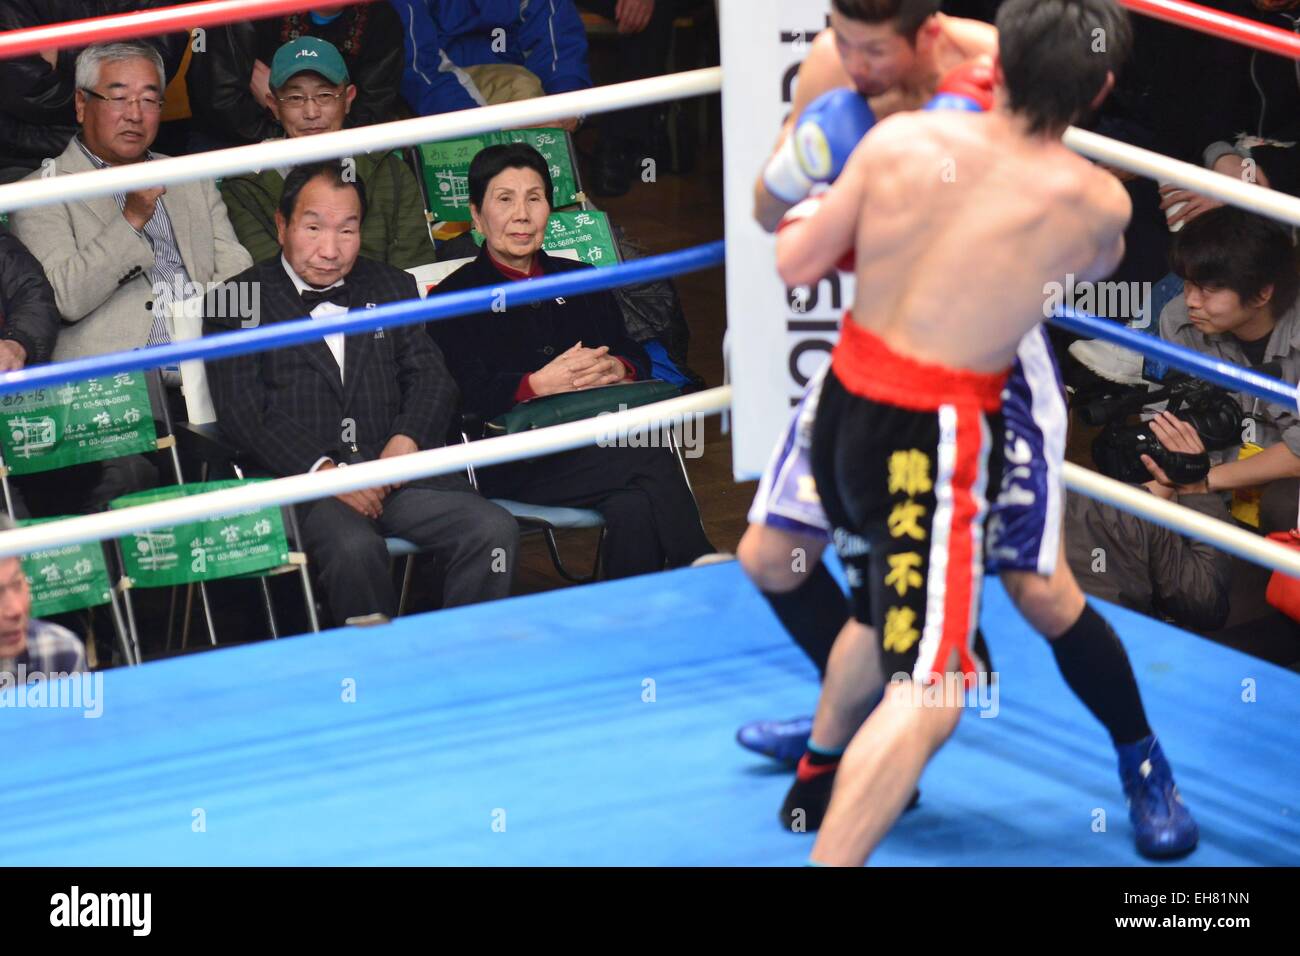 (L-R) Iwao Hakamada, Hideko Hakamada, MARCH 5, 2015 - Boxing : Iwao Hakamada watches the 8R featherweight bout between Toru Suzuki and Tatsuya Yanagi with his sister Hideko Hakamada at Korakuen Hall in Tokyo, Japan. Iwao Hakamada is a Japanese former professional boxer who was sentenced to death on September 11, 1968 and ended up spending 45 years on death row. In 2011 the Guinness World Records certified Hakamada as the world's longest-held death row inmate. In March 2014, he was granted a retrial and an immediate release when the Shizuoka district court found there was reason to believe evid Stock Photo